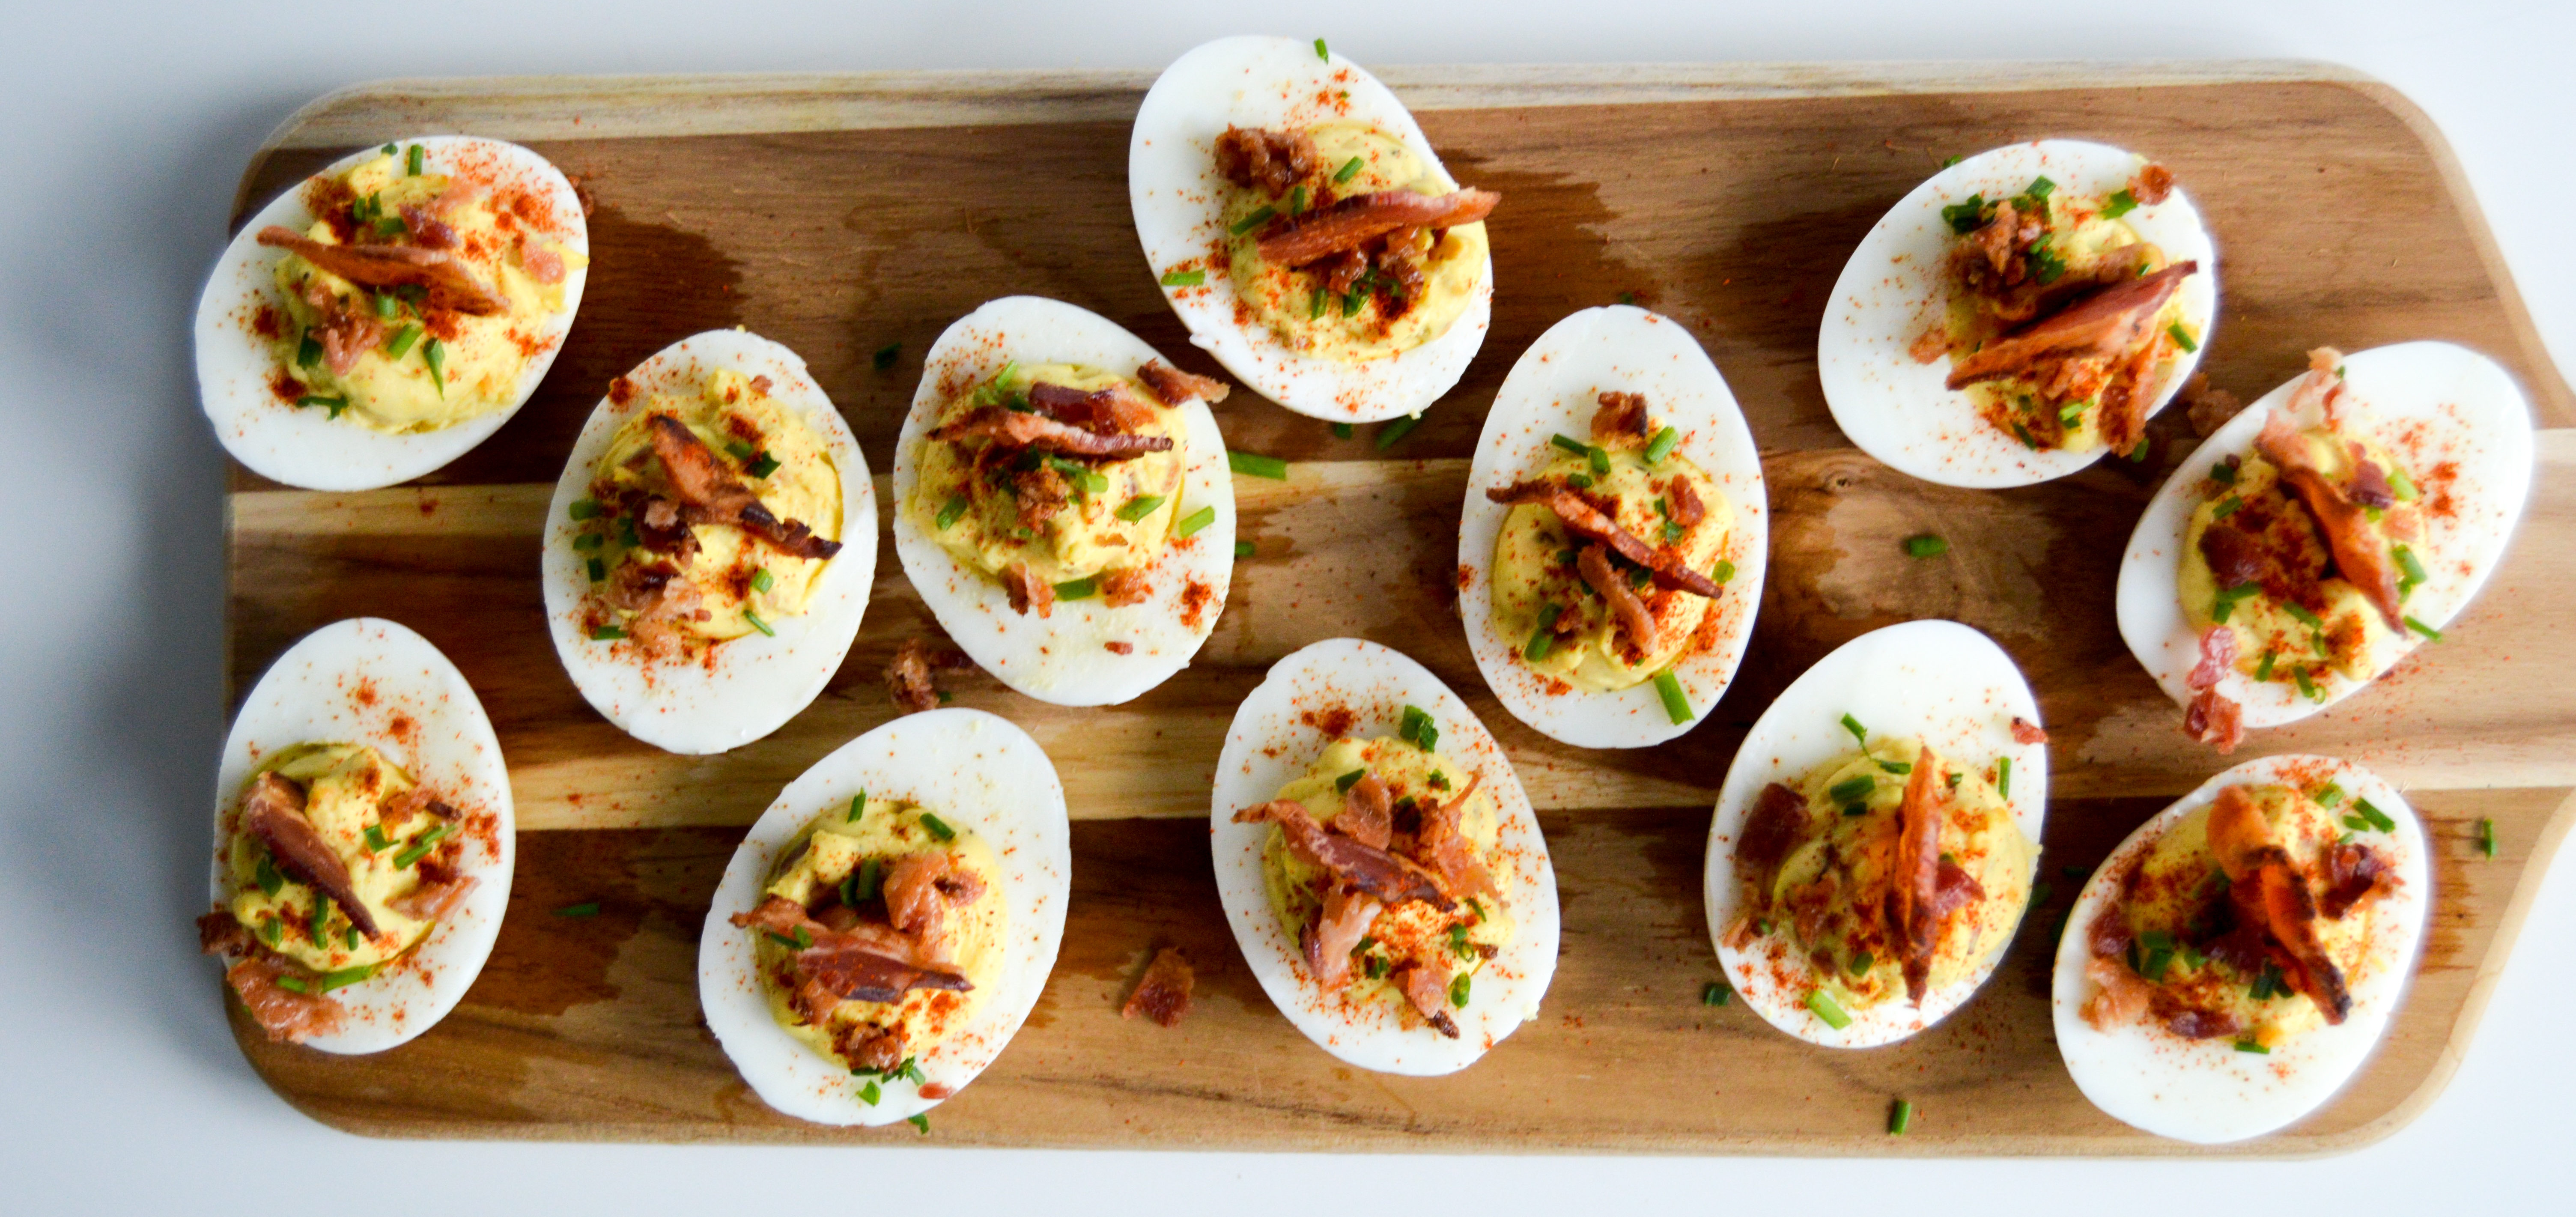 Bacon Loaded Deviled Eggs Recipe - Party food and appetizer